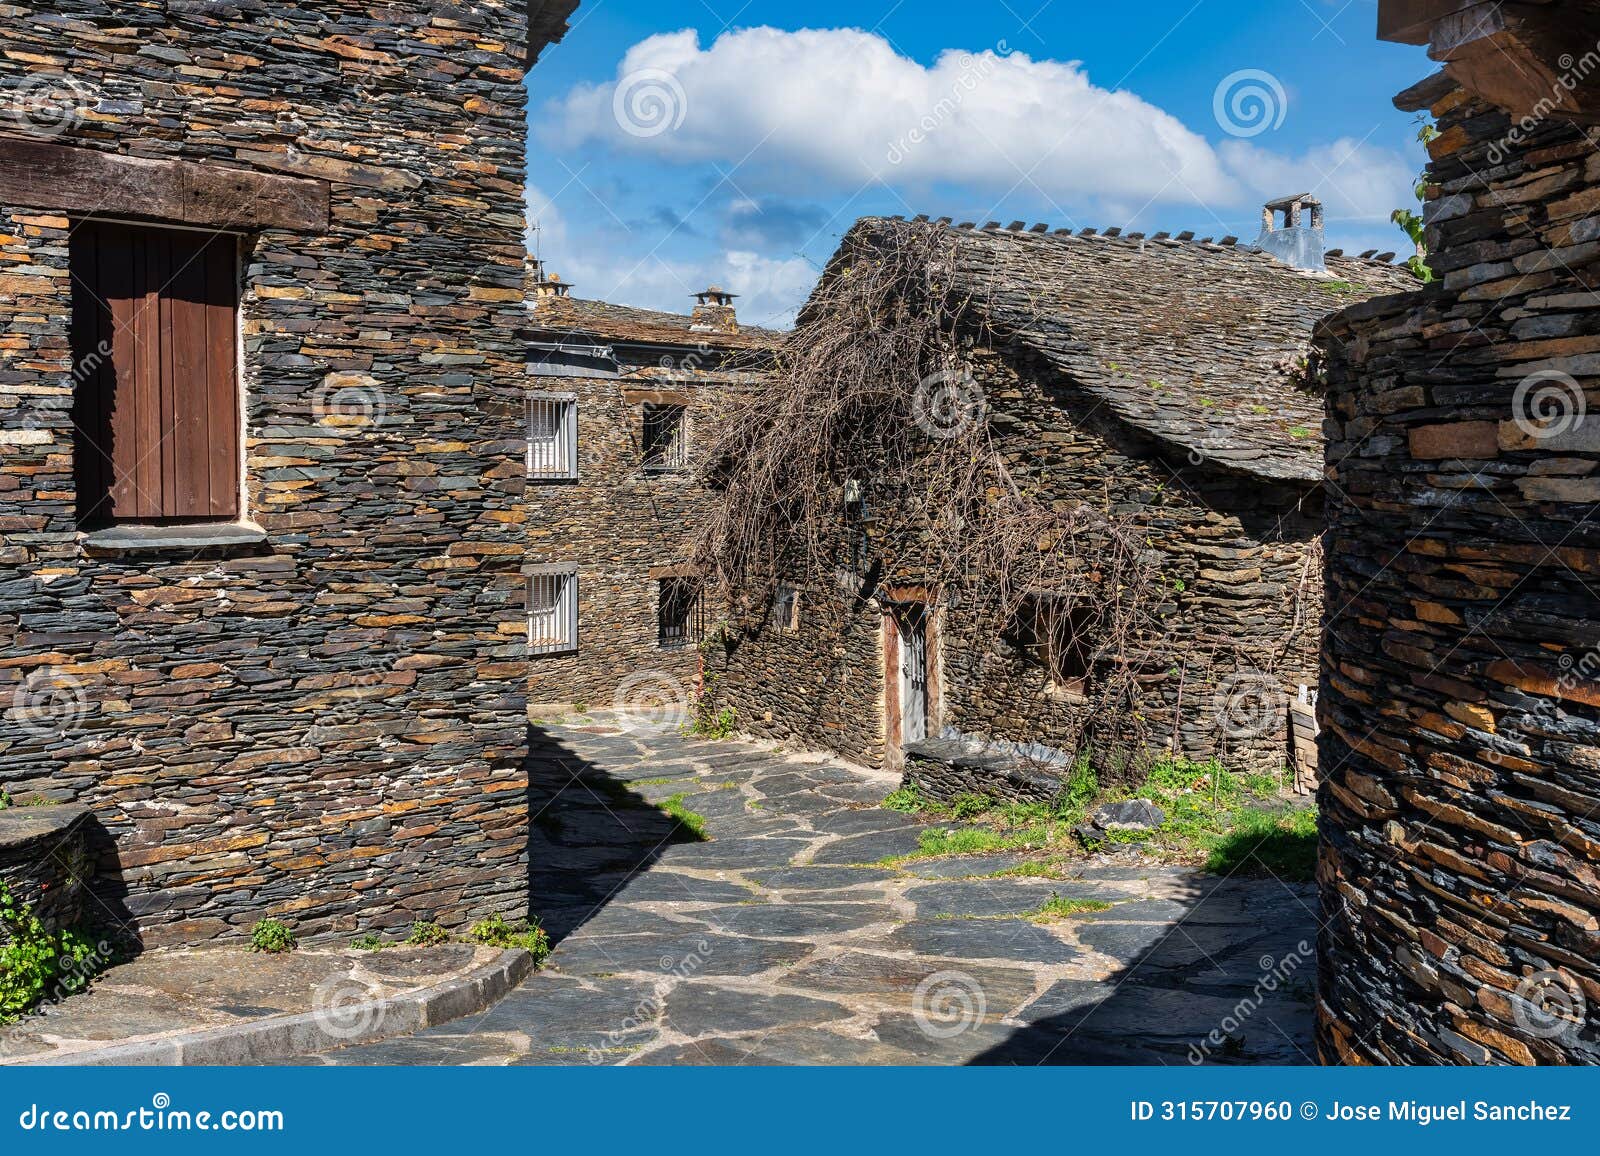 old stone constructions on the route of the black villages, majaelrayo, guadalajara.